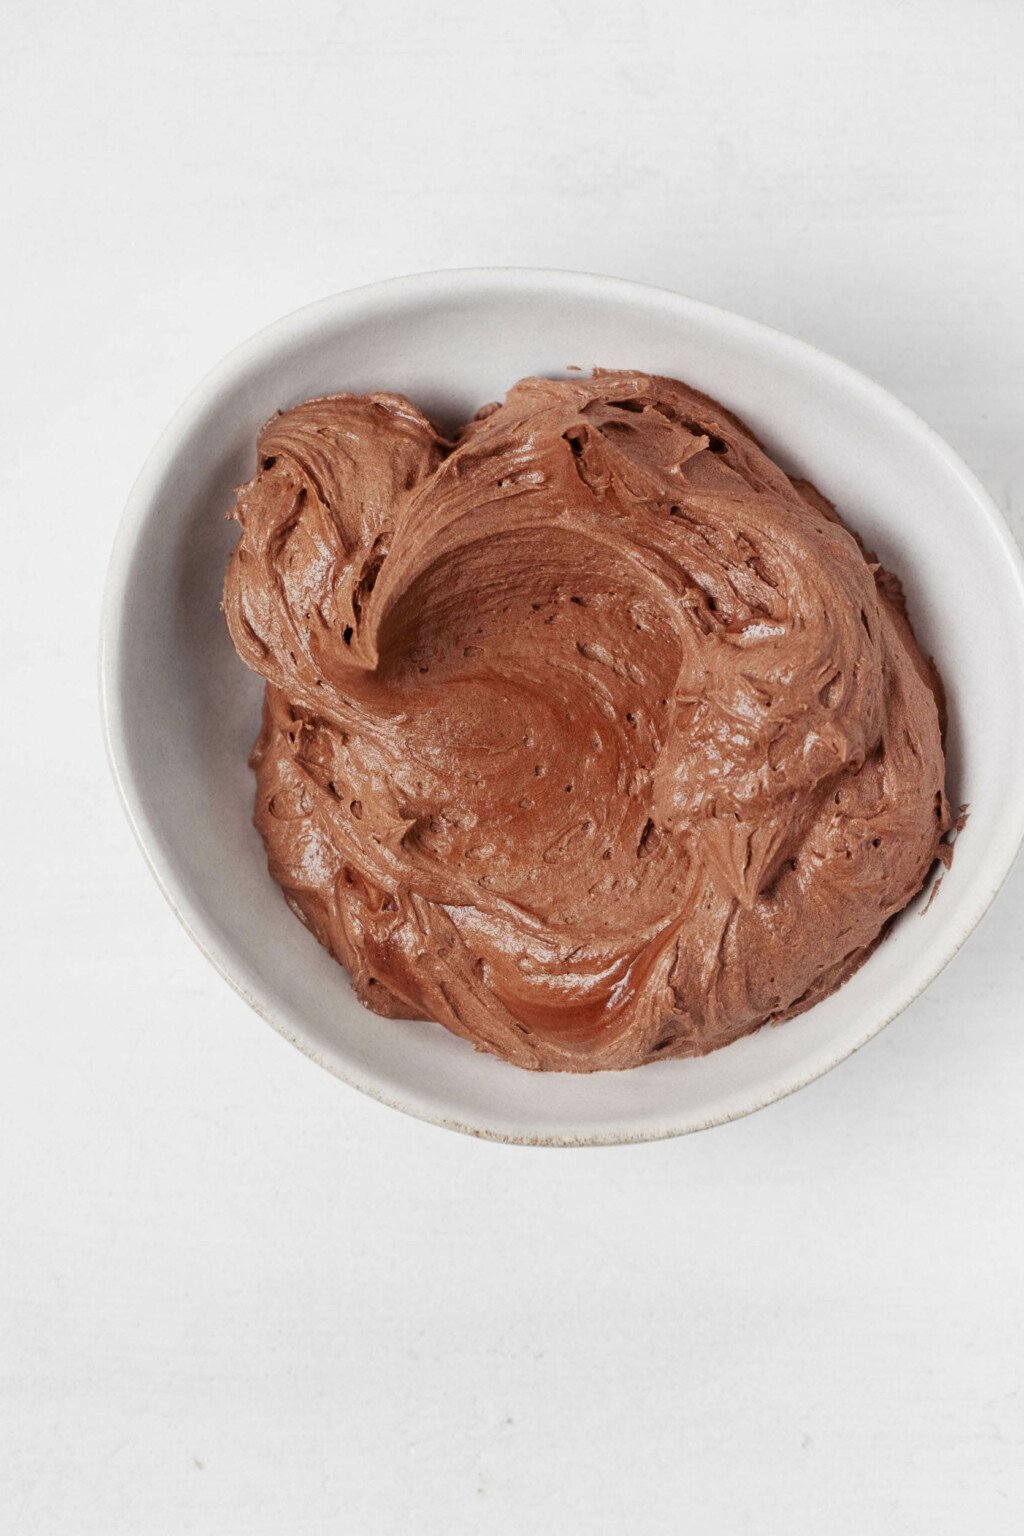 A swirled vegan chocolate frosting is served in a small, asymmetrical ceramic bowl. It rests on a white surface.